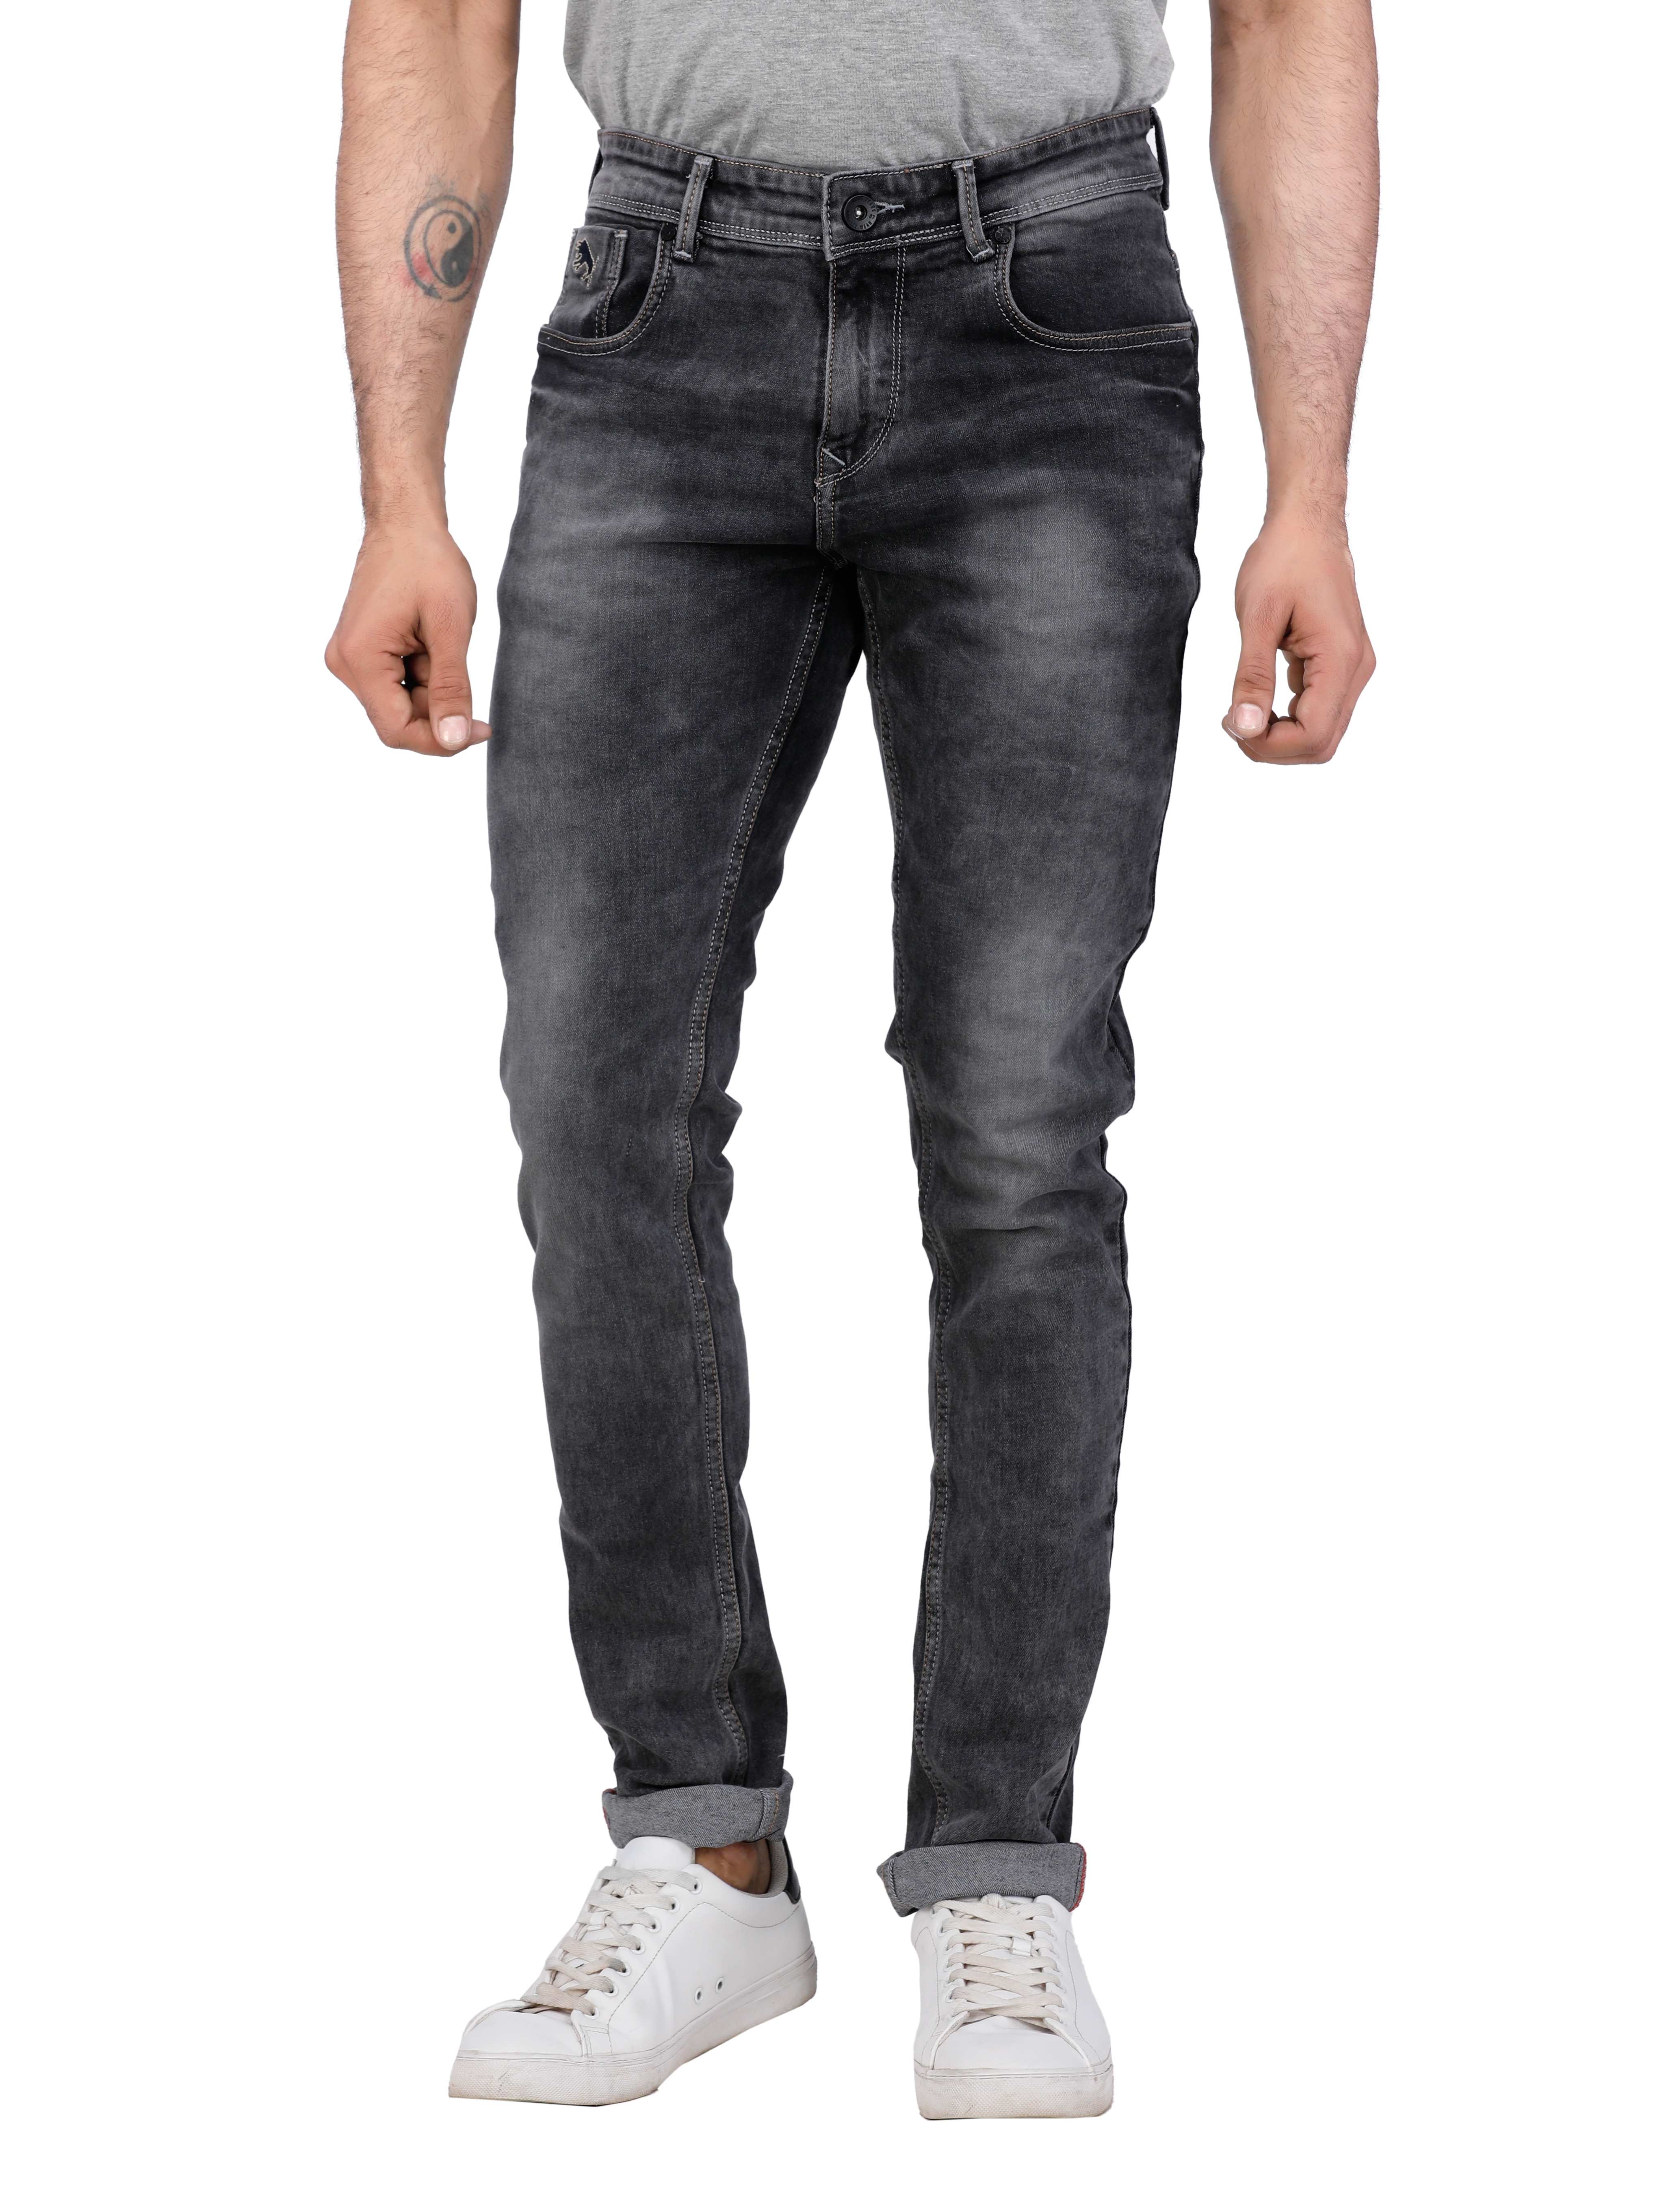 D'cot by Donear | D'cot by Donear Men Black Cotton Skinny Solid Jeans